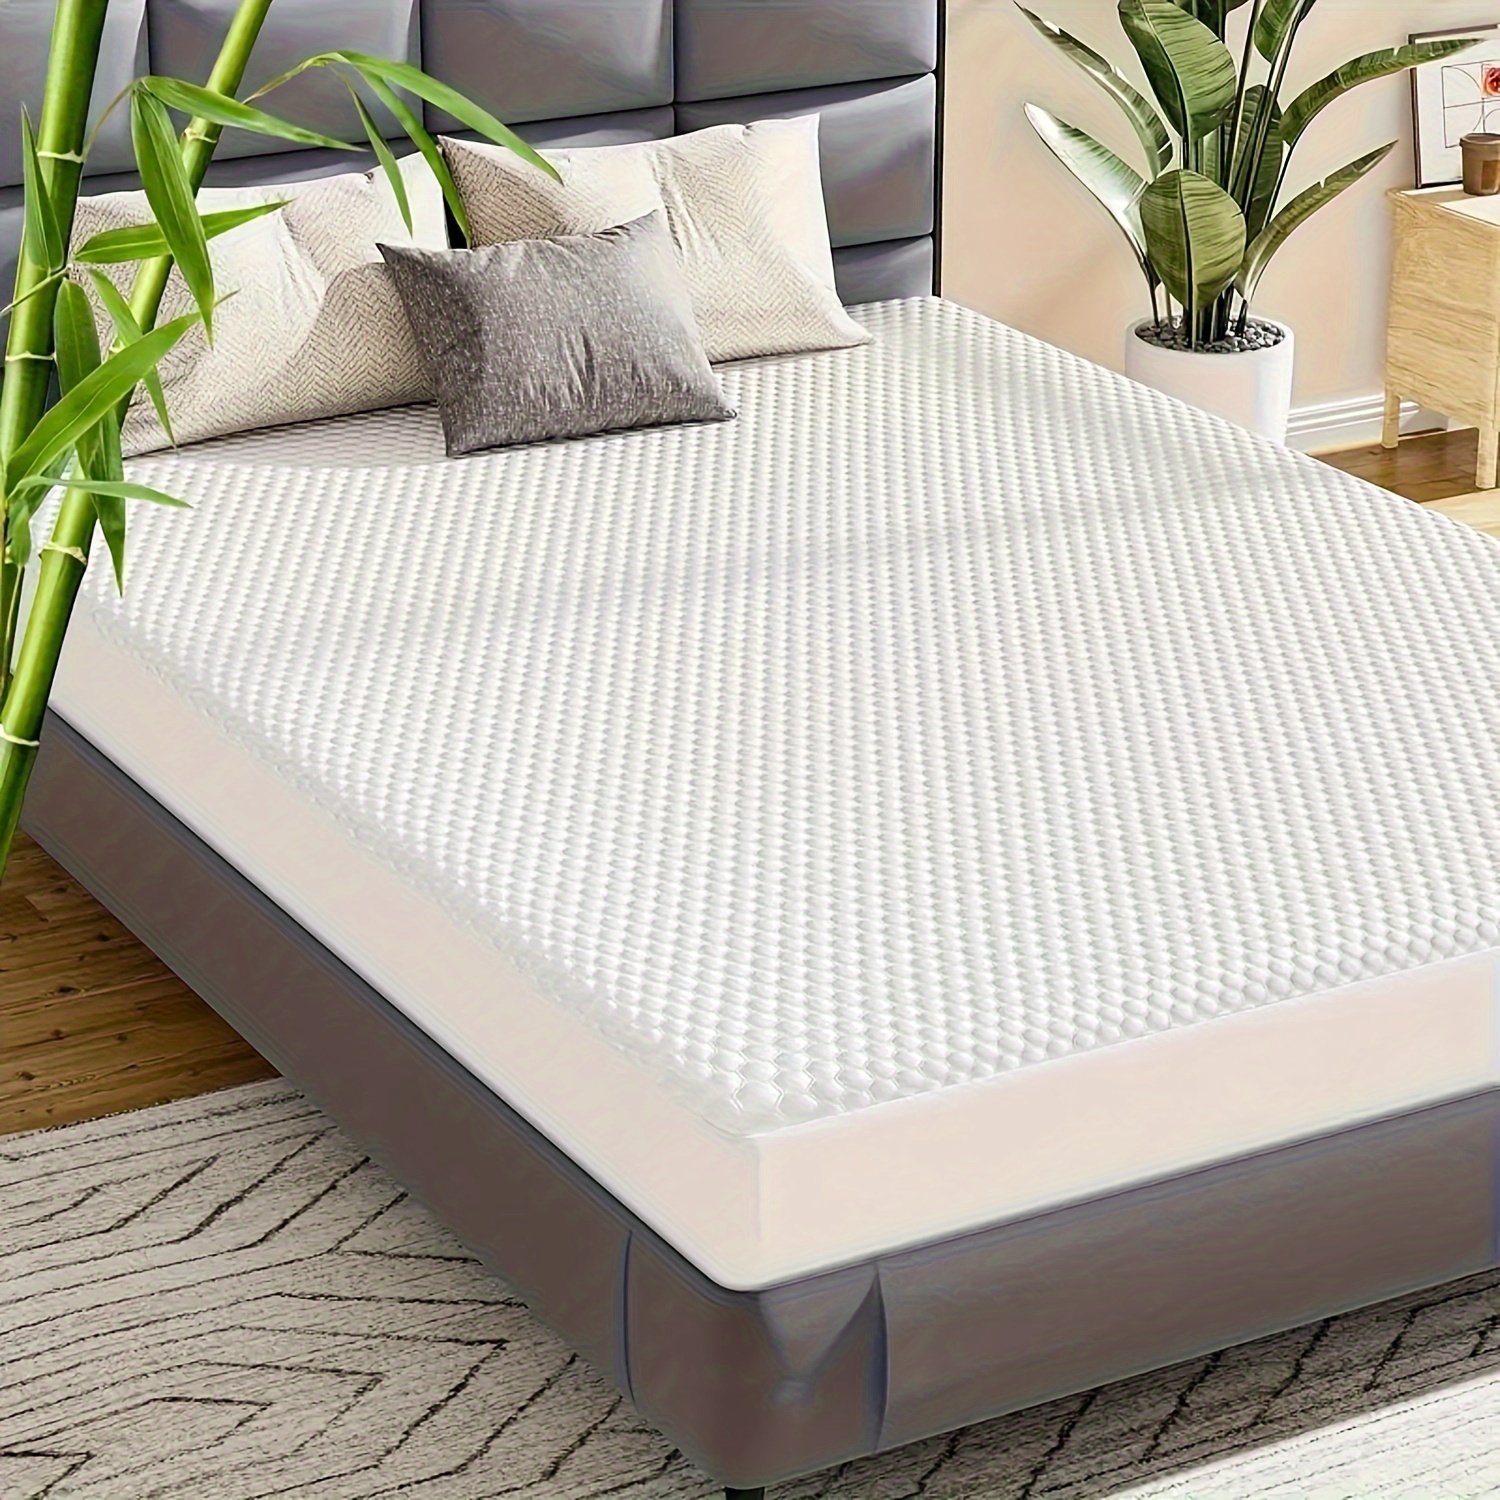 

Dumos Mattress Topper Full King Twin Queen Size, Stretch To 21" Fitted Deep Pocket Bed Cover Soft And Skin-friendly, Breathable 3d Air Fabric, 100% Waterproof Mattress Topper